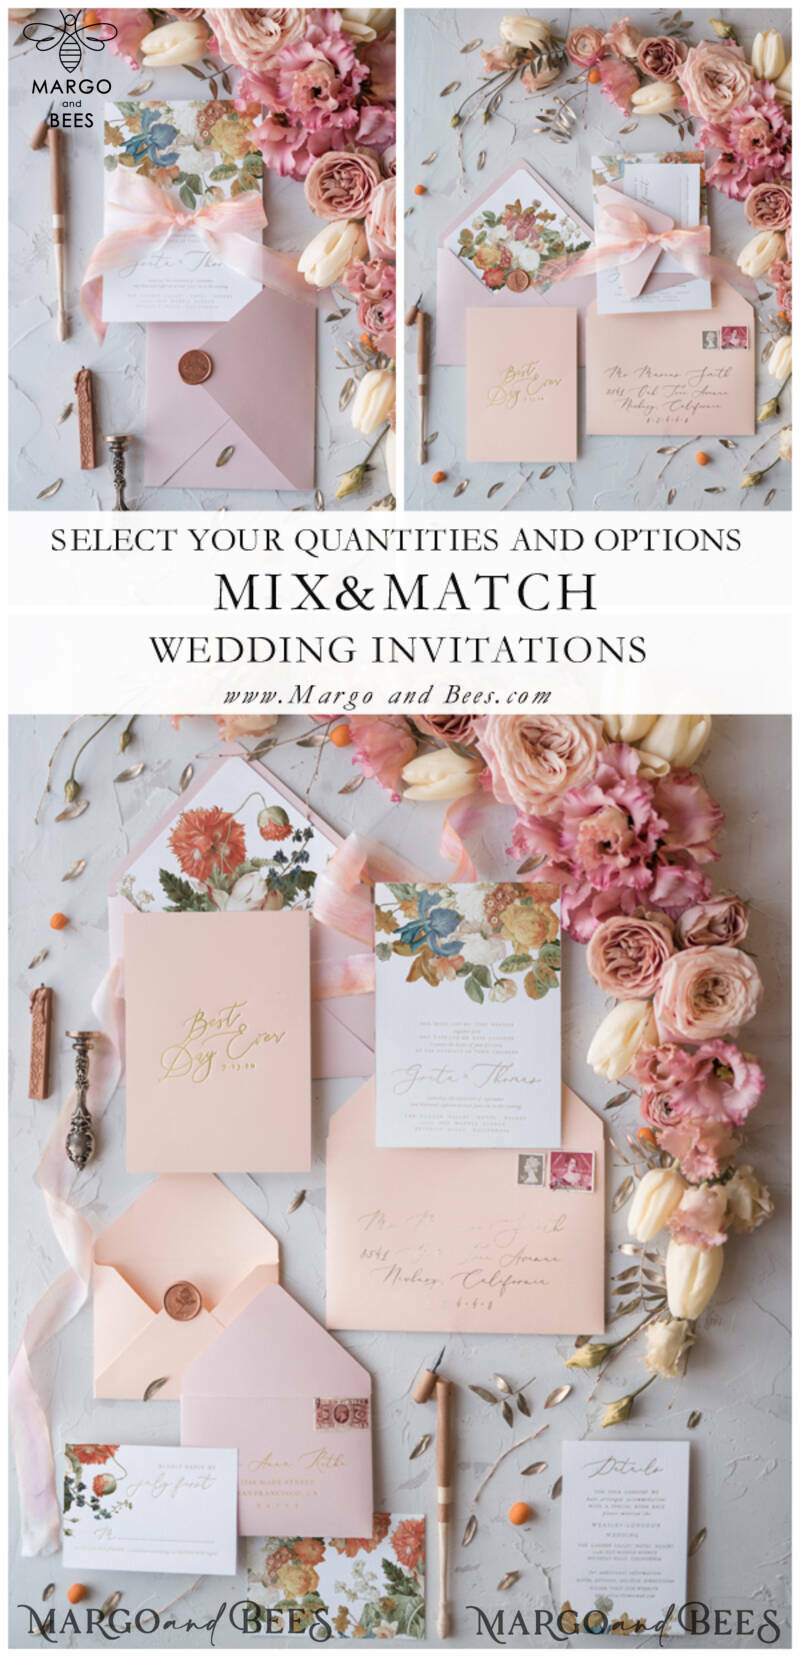 Vintage Romantic Wedding Invitations Blossom Stationery with Gold Foil Lettering Wax Seal Blush Pink or Peach Envelope-21